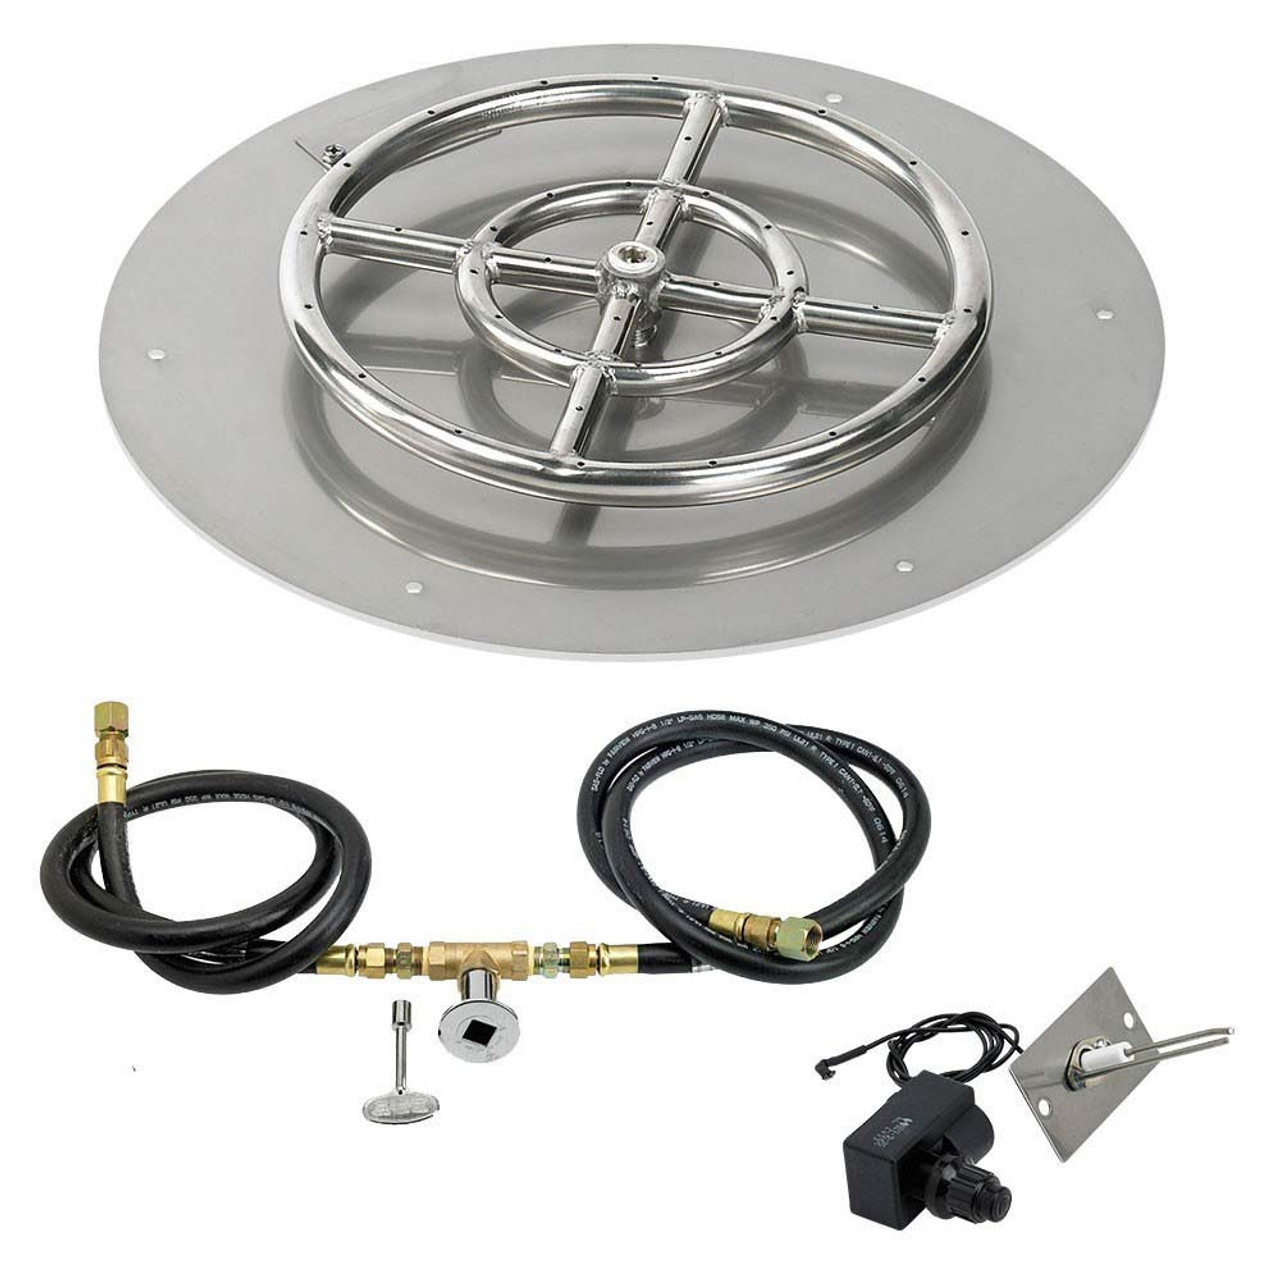 60 x 16 Linear Rectangle Flat Stainless Steel Fire Pit Kit